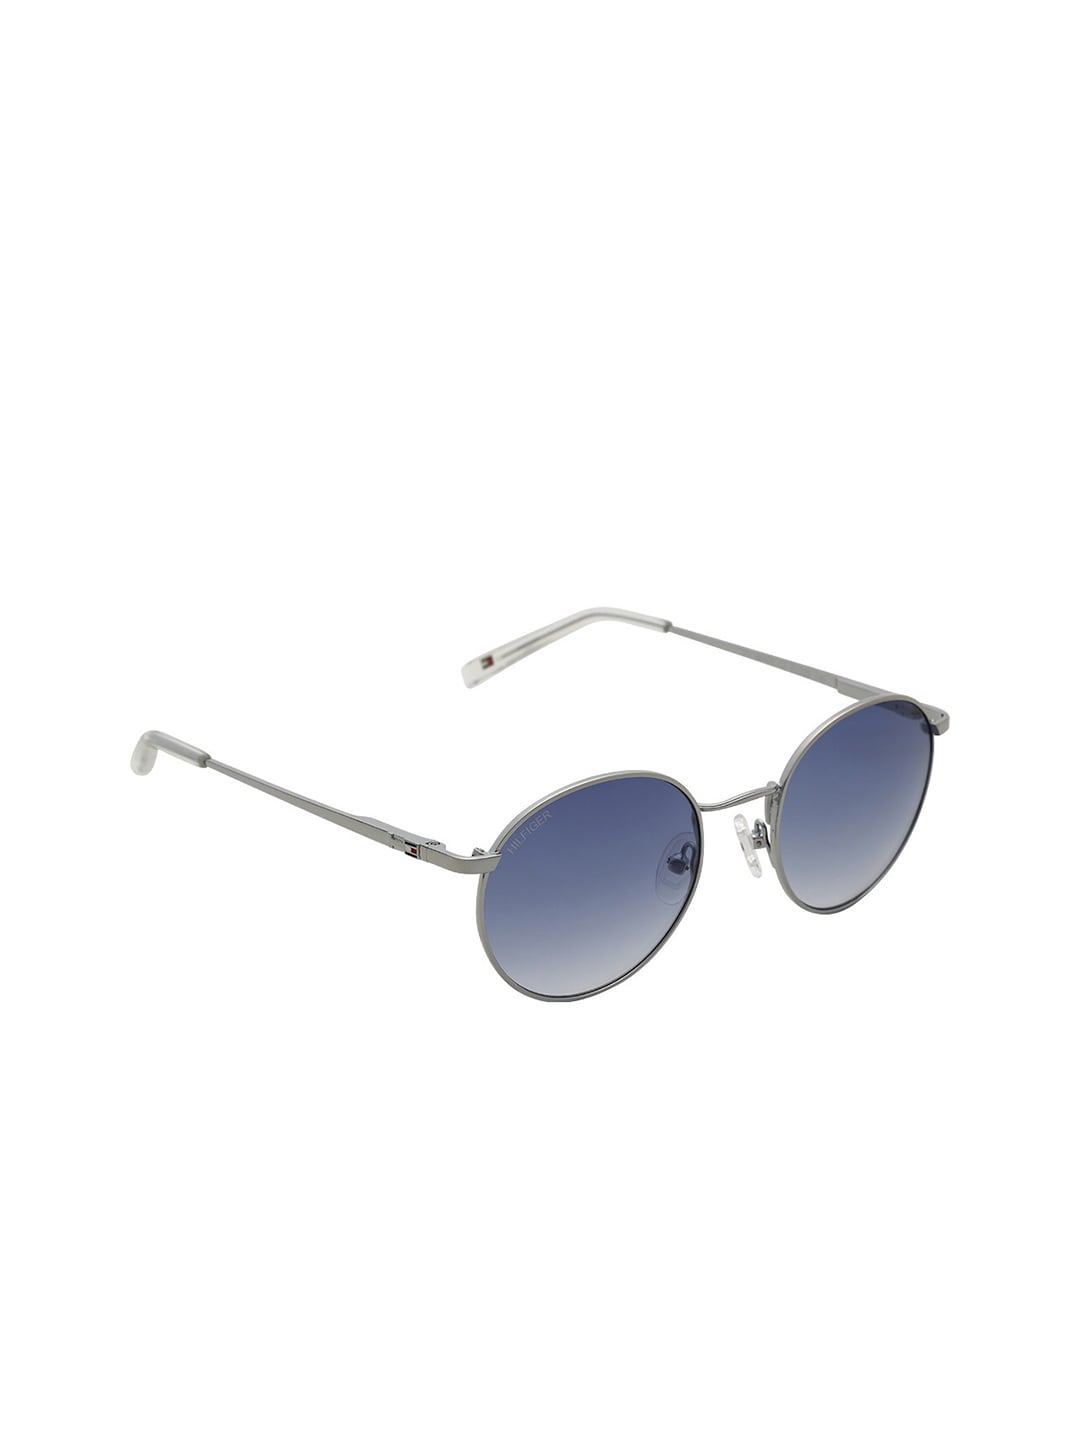 Tommy Hilfiger Unisex Blue Sunglasses Price in India